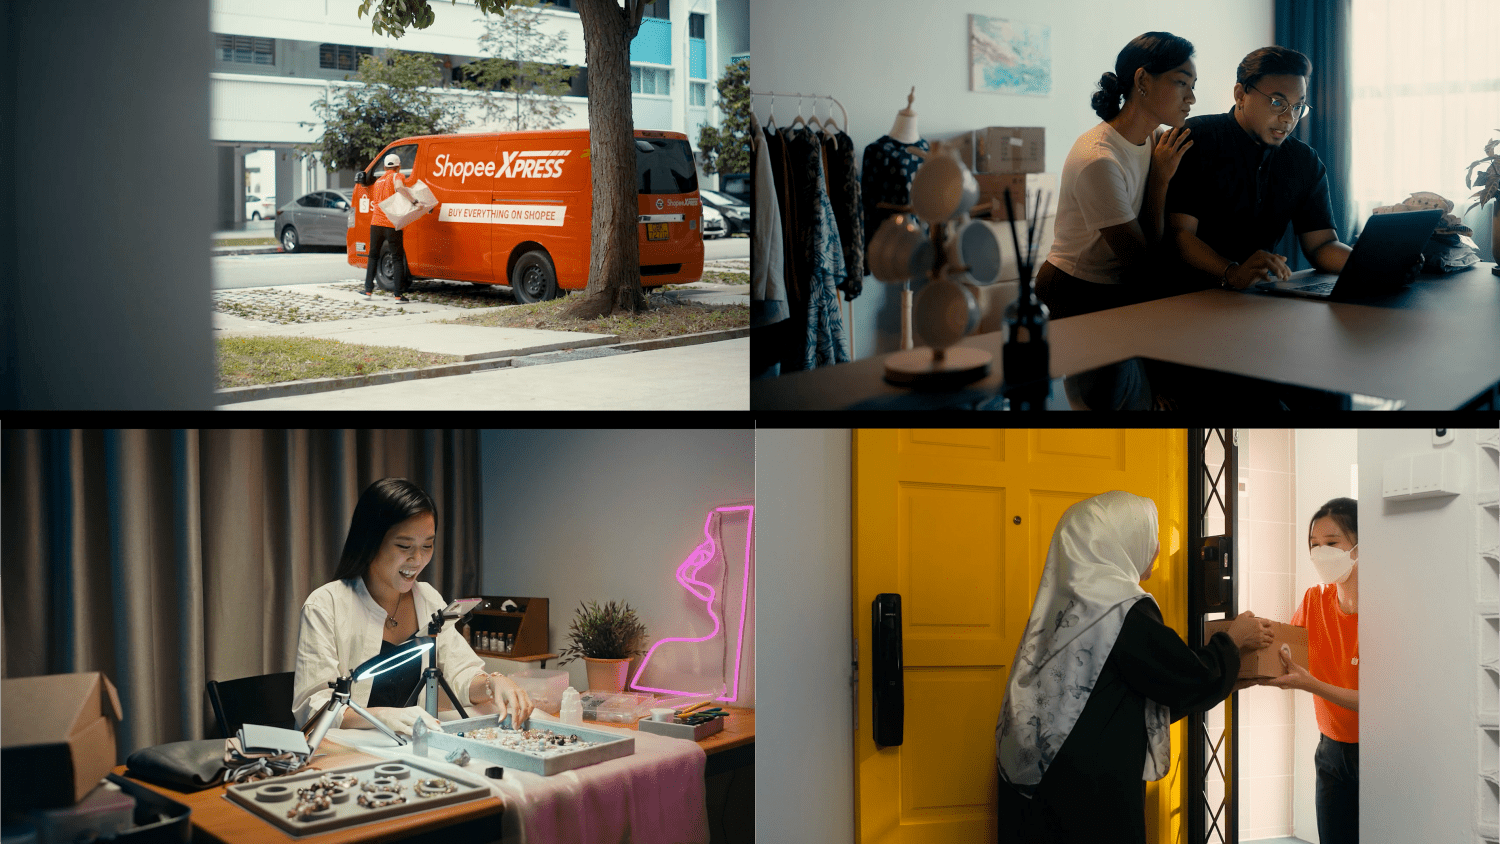 From Aug 1 to 9, Shopee is offering rewards and promotions to delight customers while supporting local businesses. Photo: Shopee